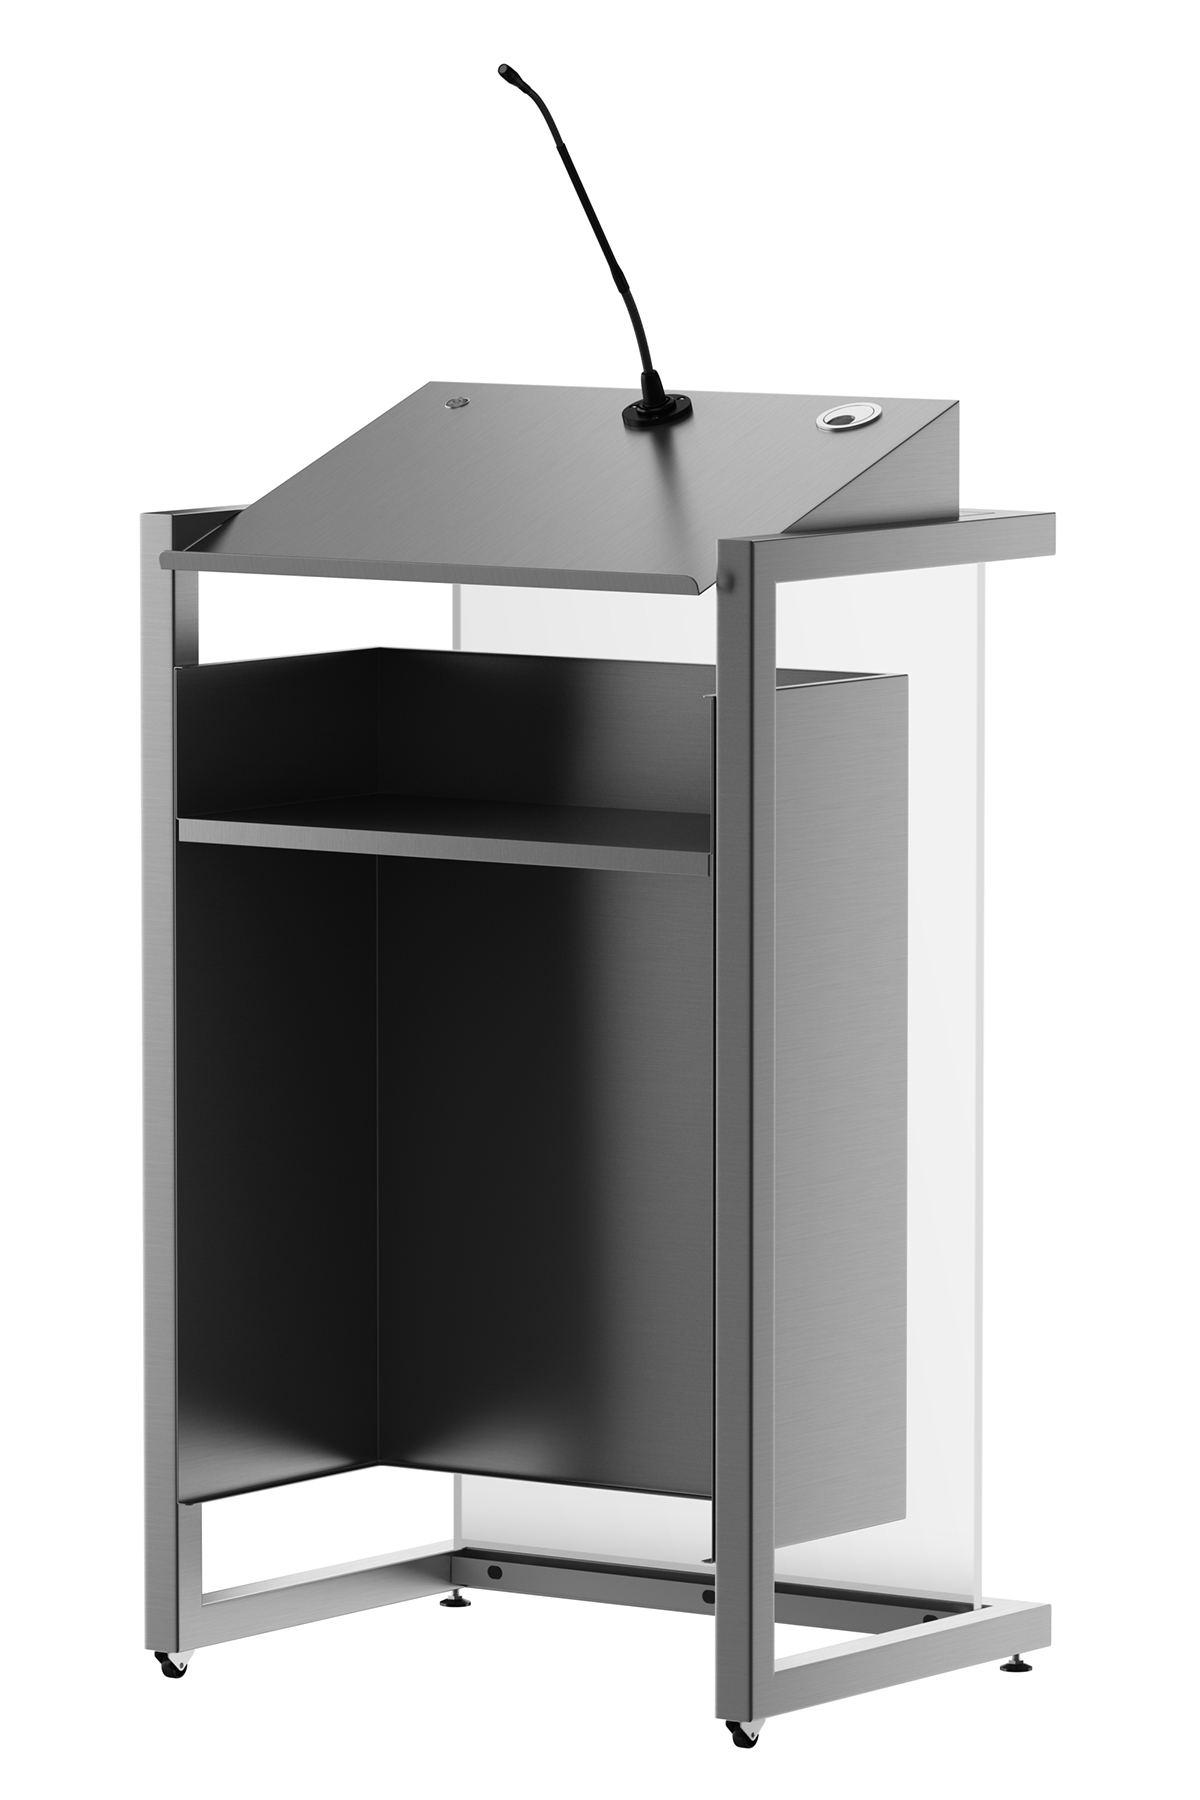 stainless steel lectern stainless steel podium lectern Presentation desk conference furniture